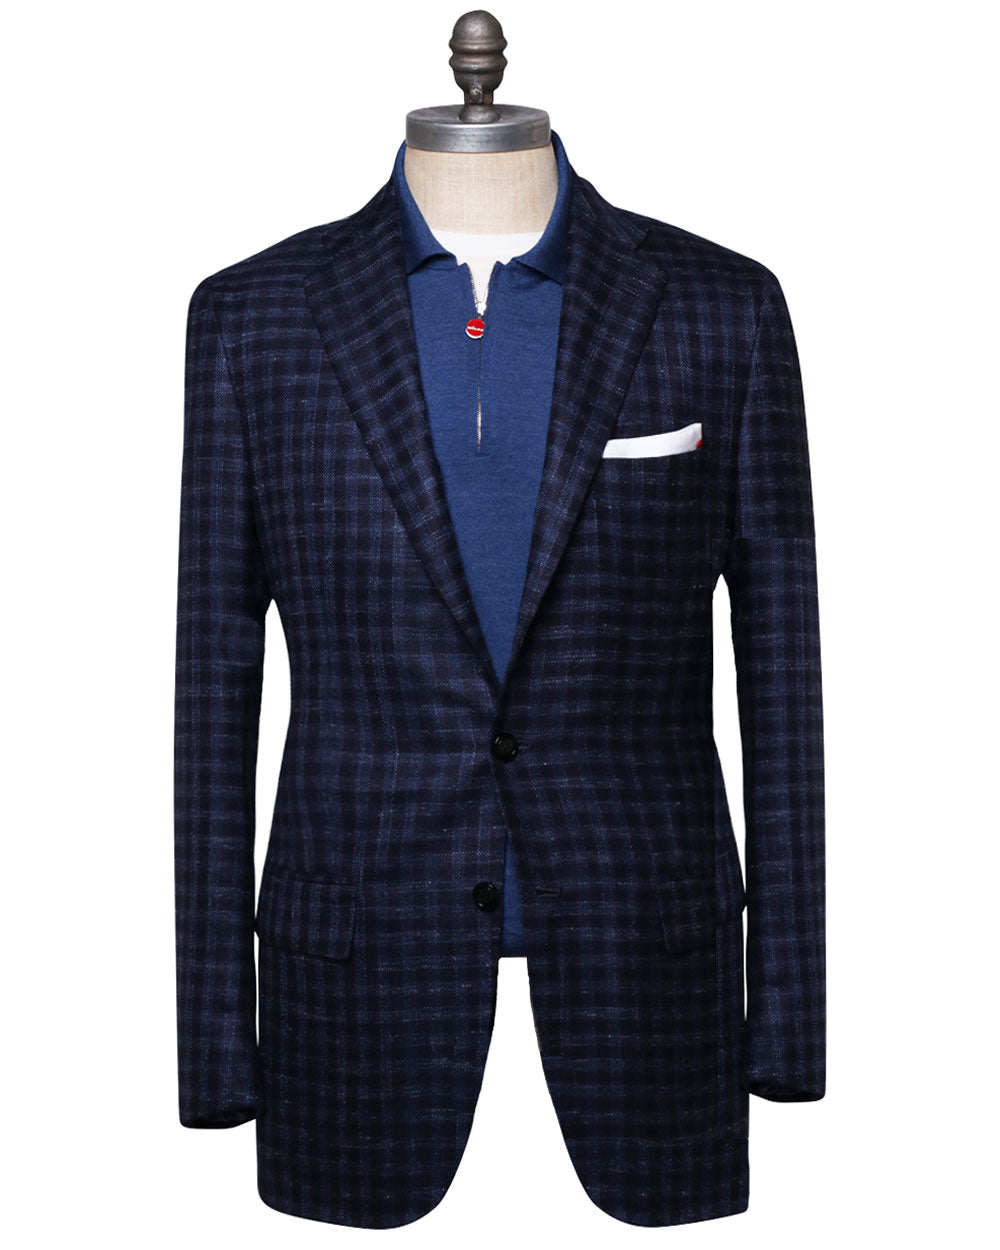 Blue and Dark Navy Check Sportcoat